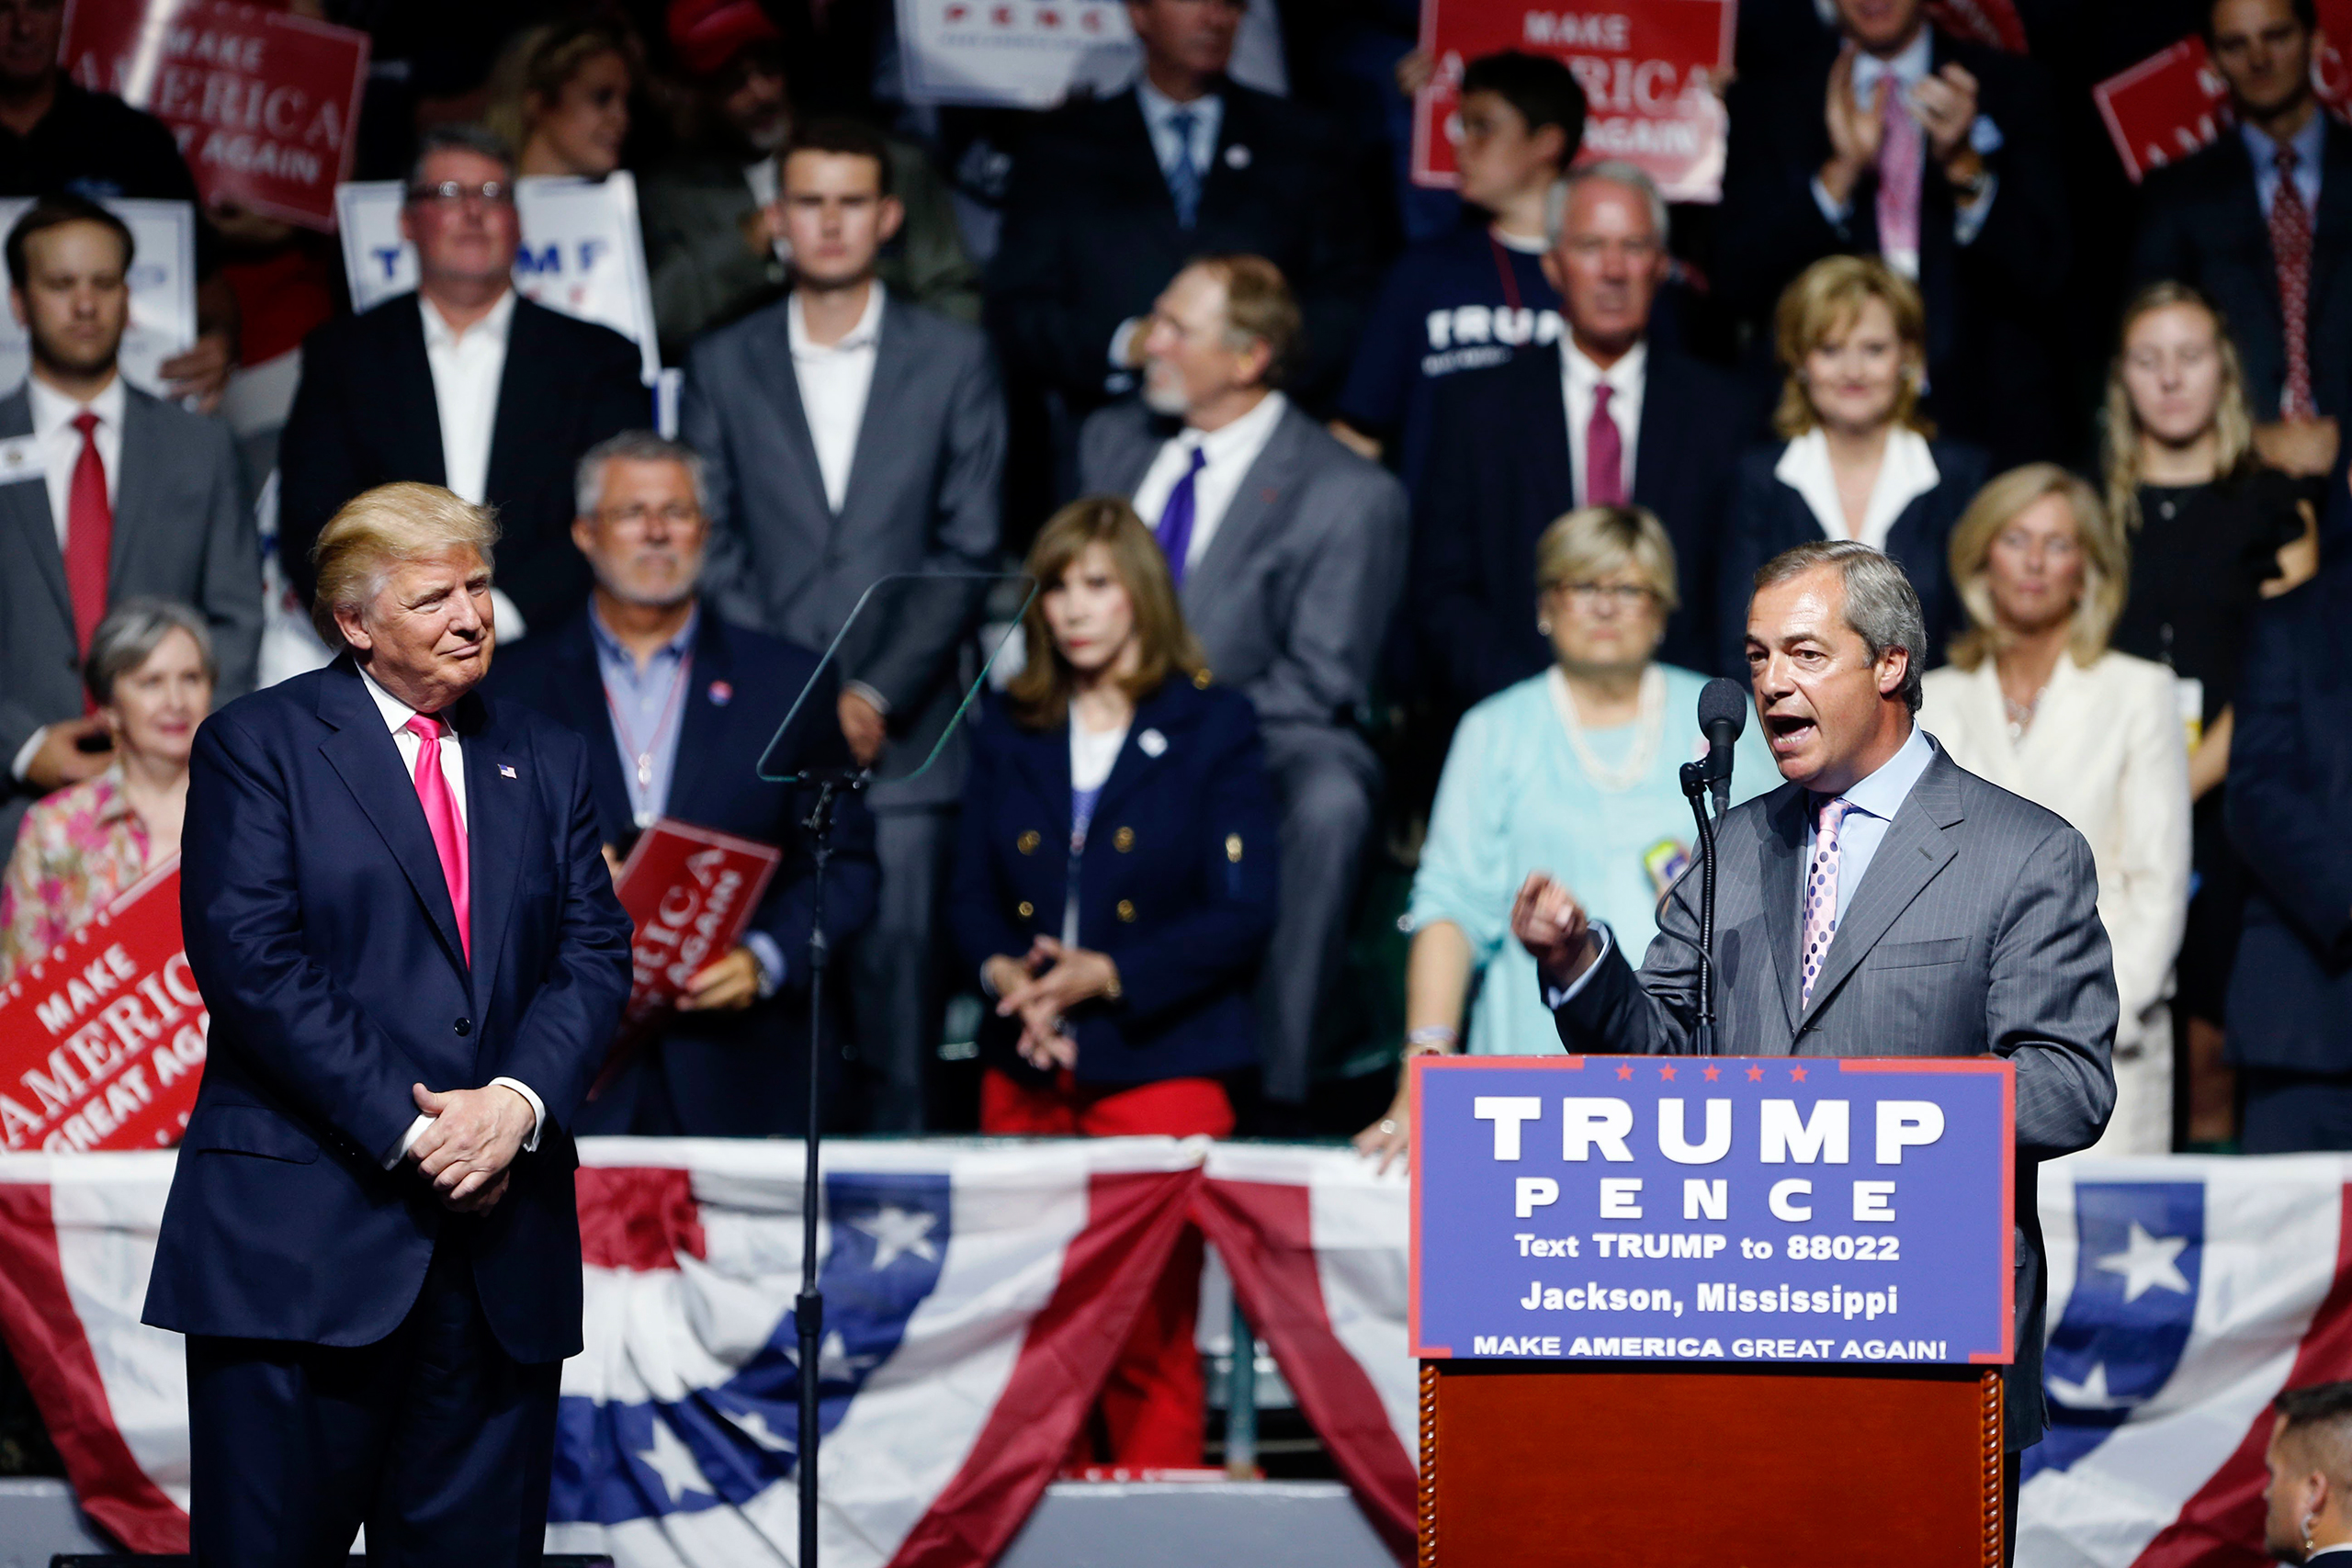 Nigel Farage, ex-leader of the British UKIP party, speaks as Republican presidential candidate Donald Trump listens at Trump's campaign rally in Jackson, Miss., on Aug. 24, 2016. (Gerald Herbert—AP)